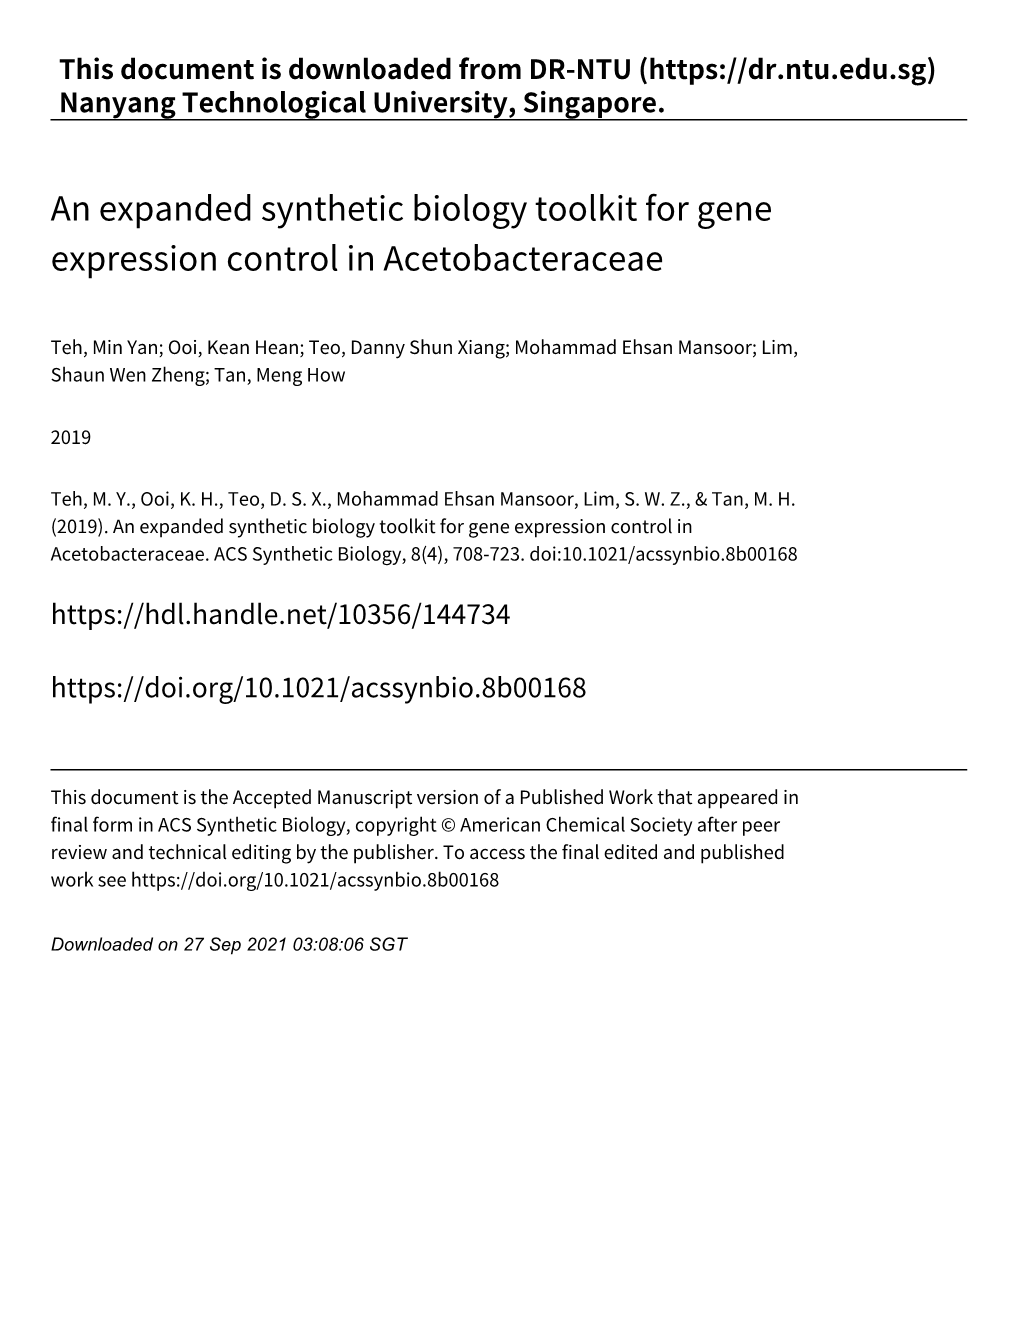 An Expanded Synthetic Biology Toolkit for Gene Expression Control in Acetobacteraceae